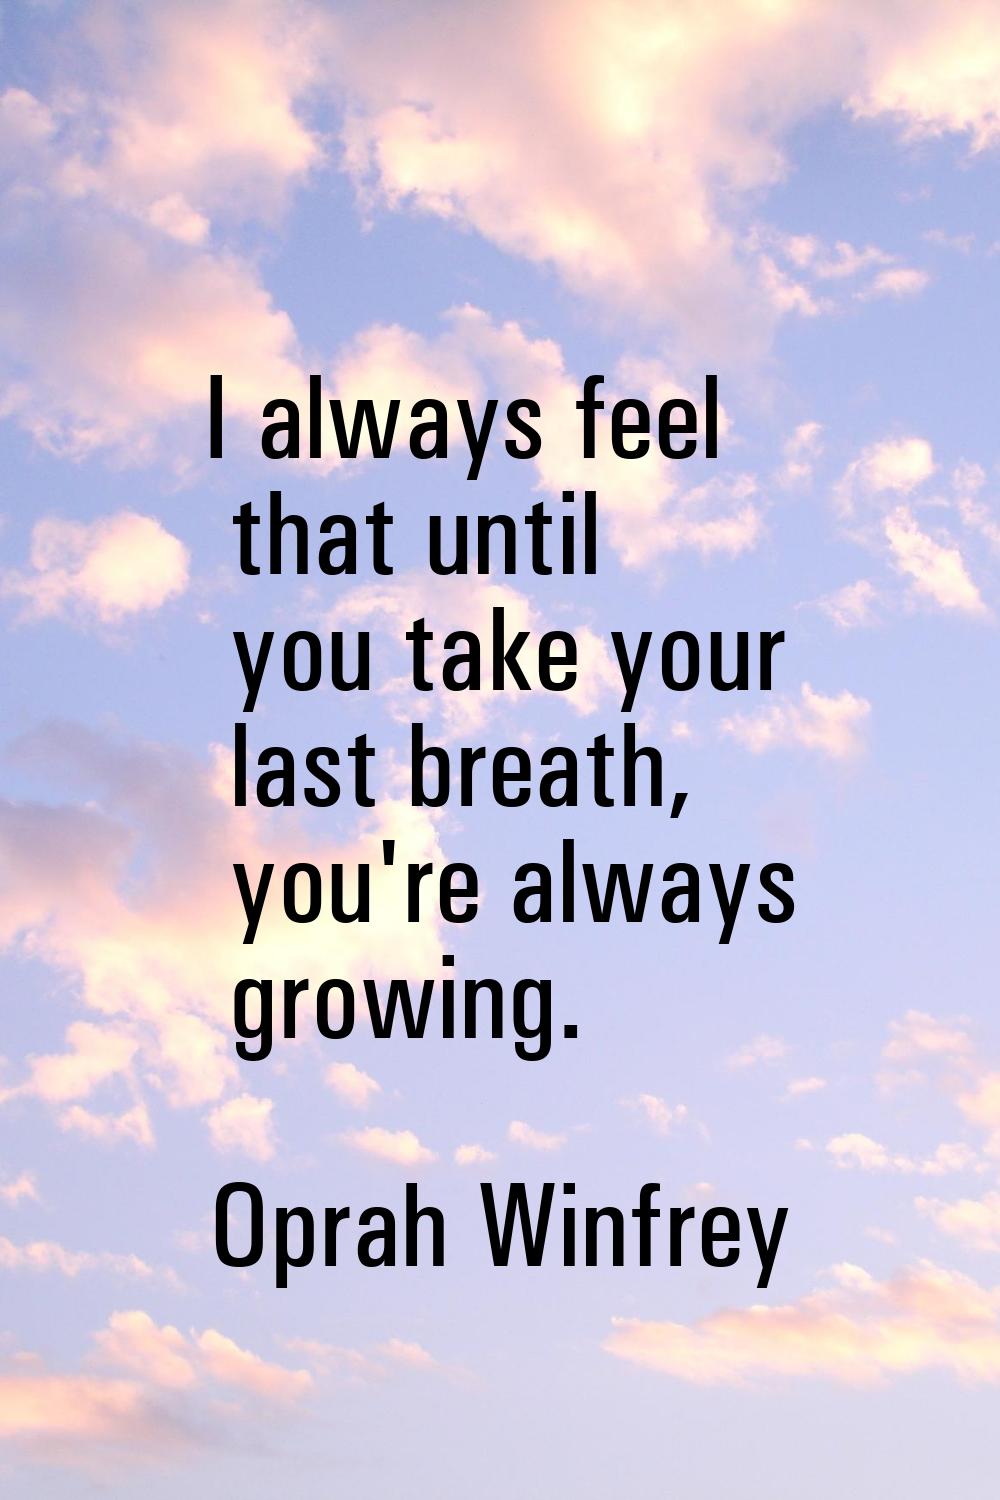 I always feel that until you take your last breath, you're always growing.